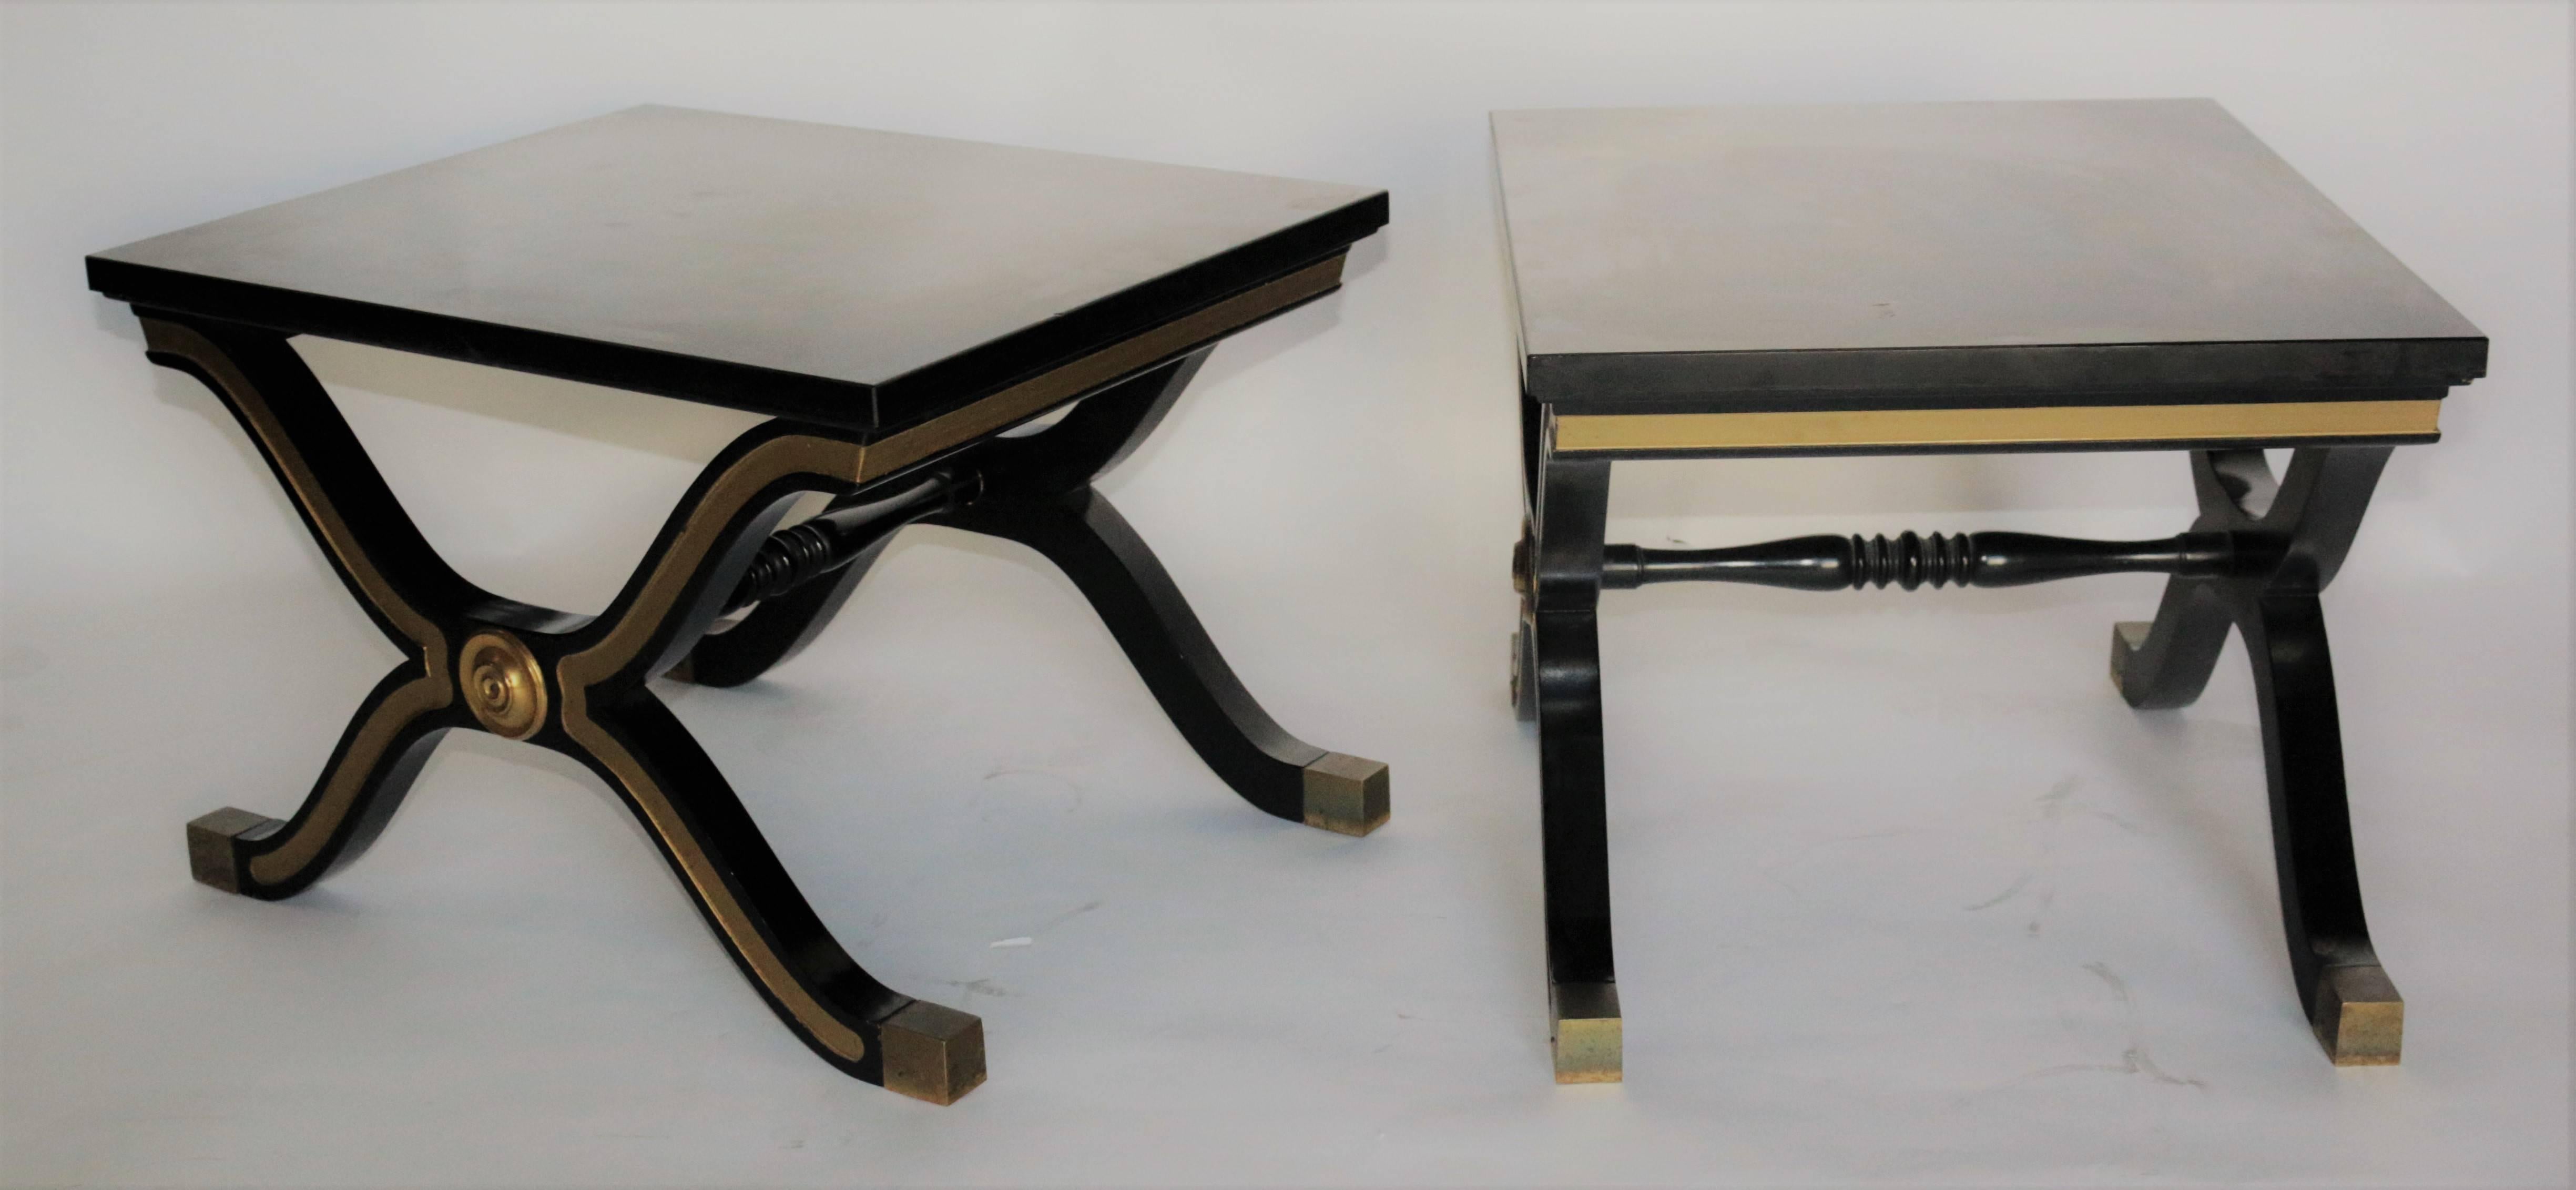 Modern pair of vintage Dorothy Draper side tables in great condition. The color schemes is a deep black lacquer with golden accents following the layout of the body. There are brass fittings on each leg at the tip of the foot and there are
brass